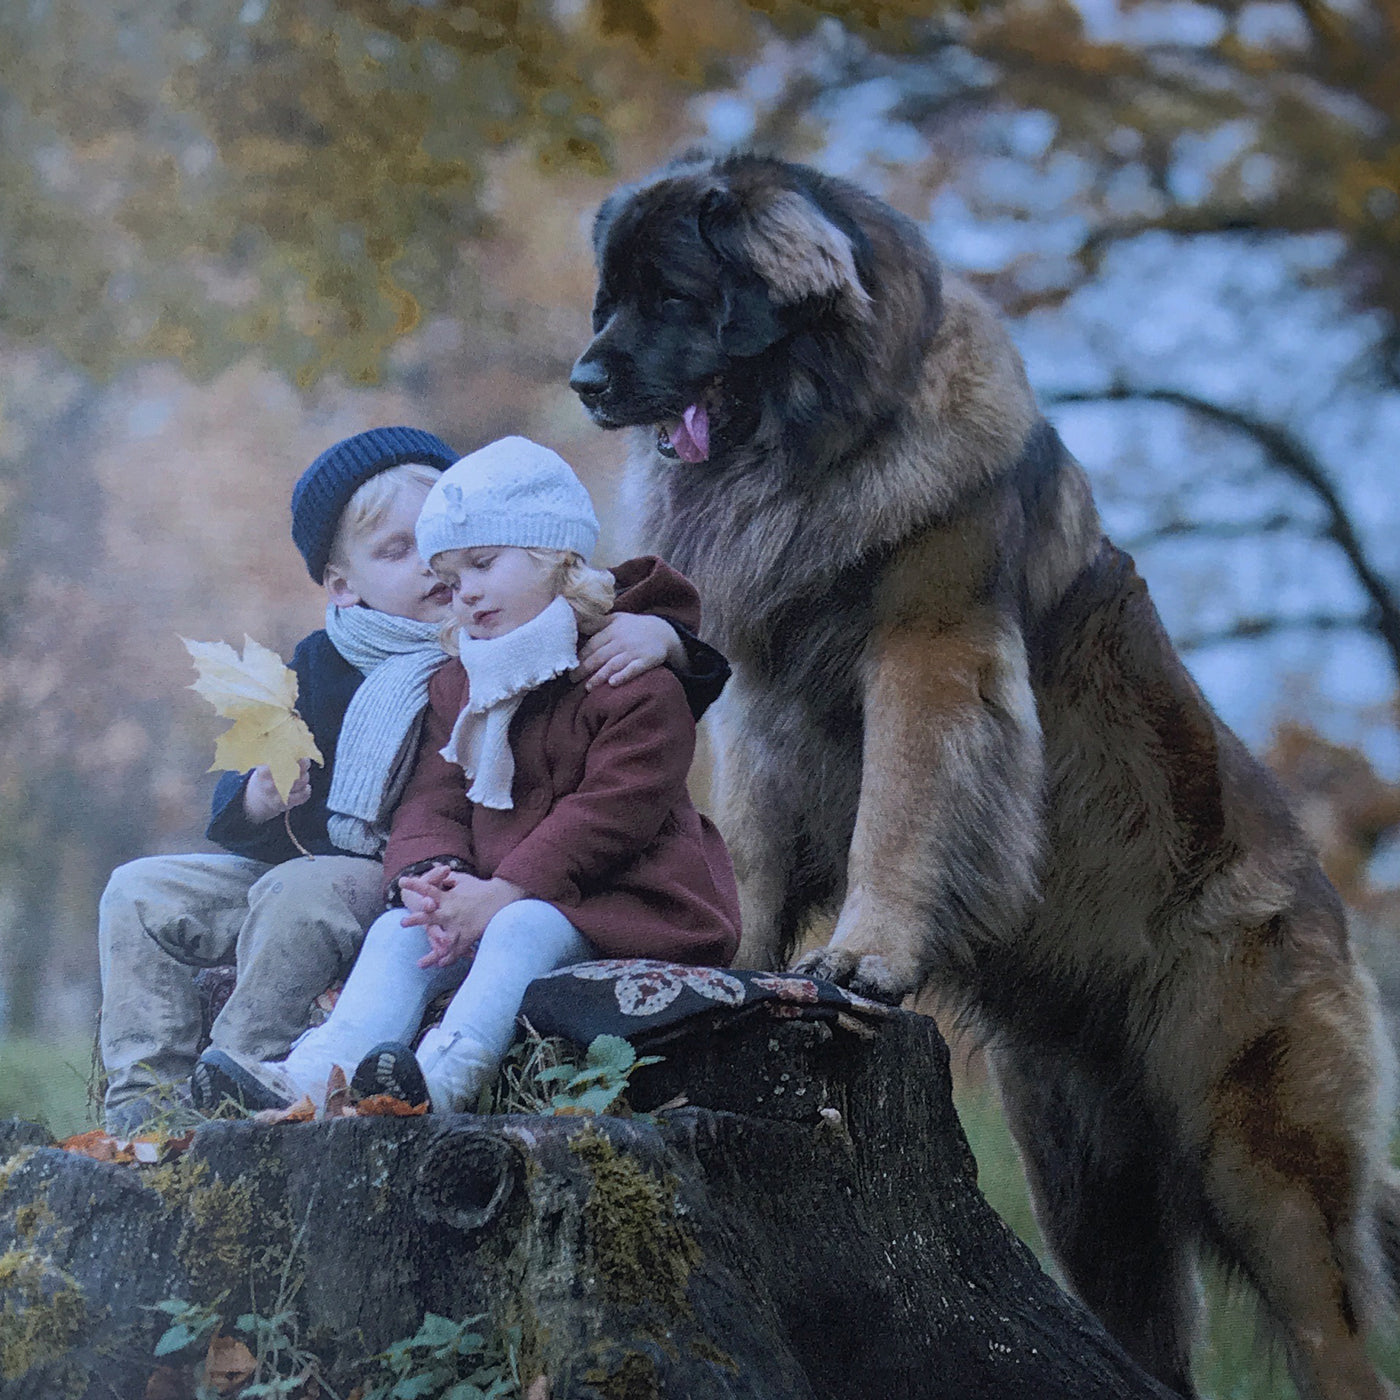 little kids and their big dogs - Volume 2